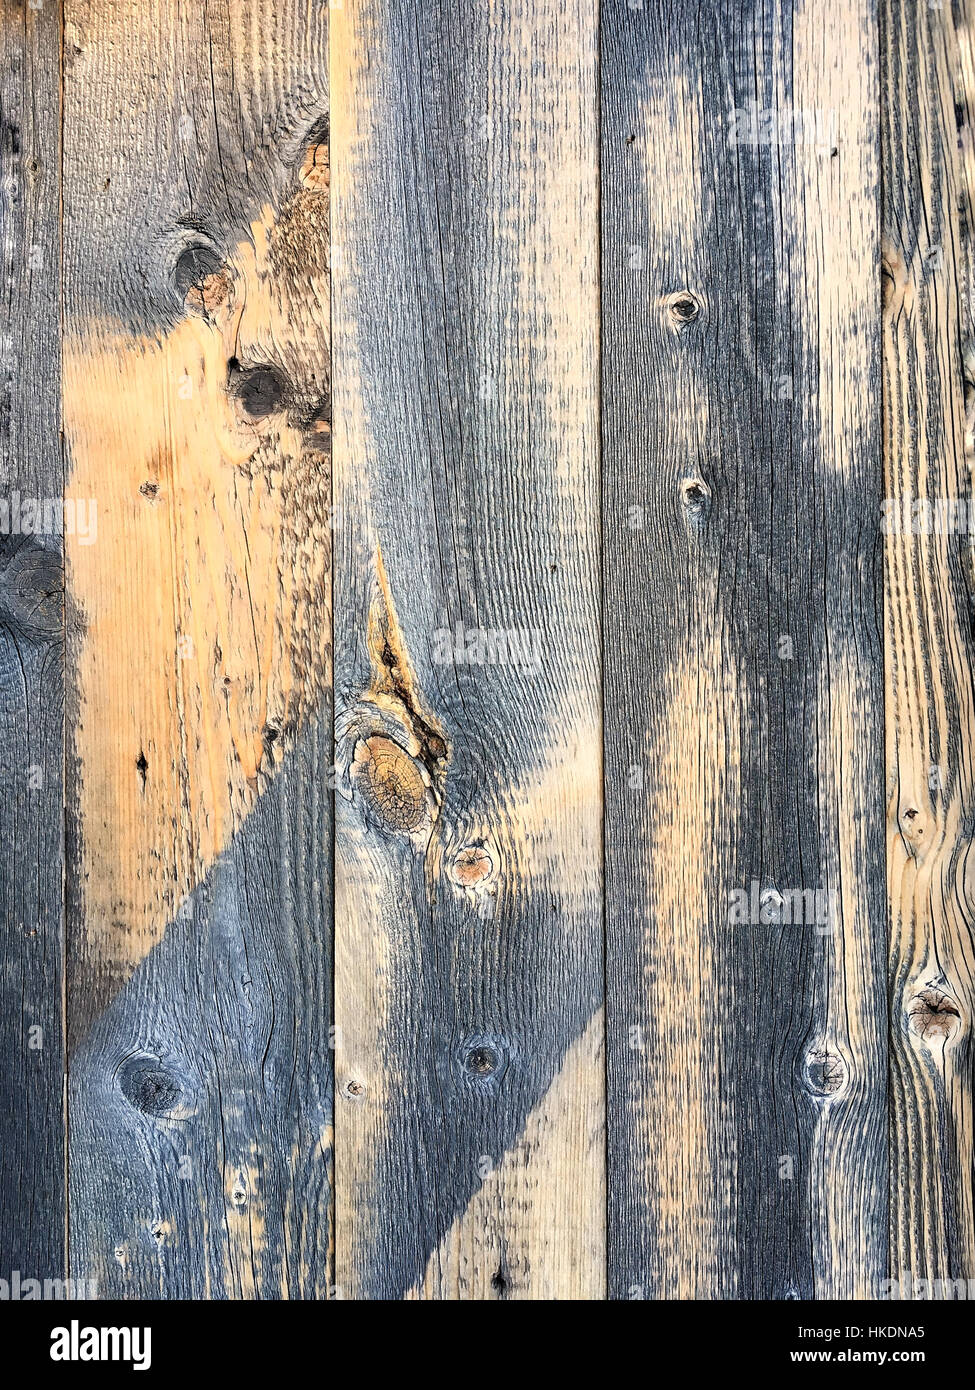 Old textured wood boards with aged discoloration Stock Photo